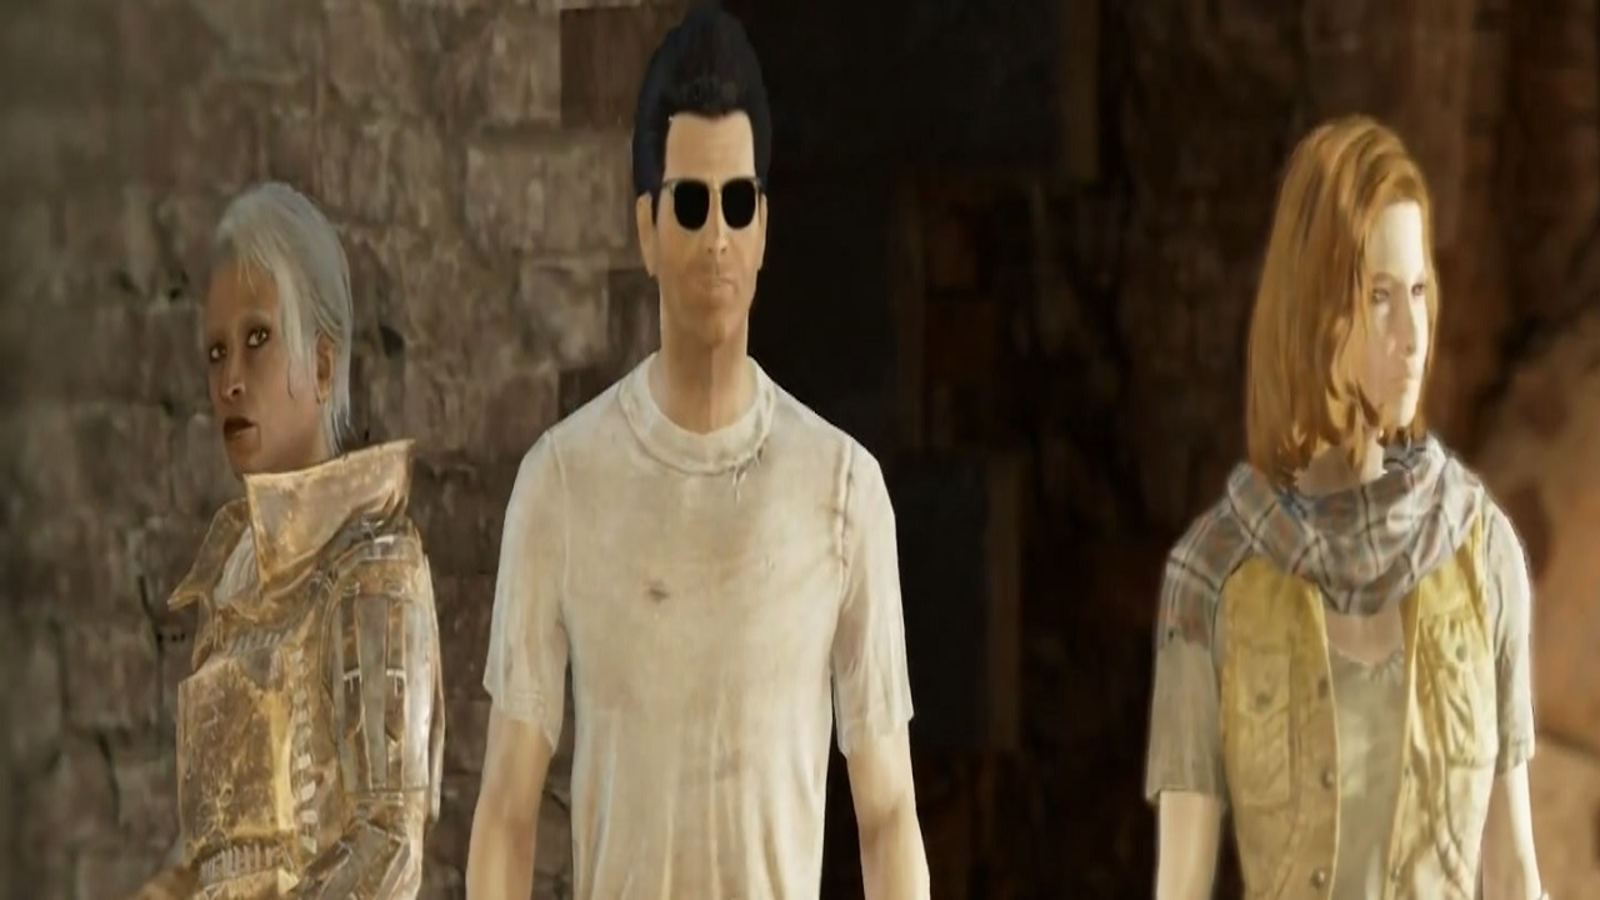 Meet Giga-Chad, A new character where I'm trying to beat Fallout 4